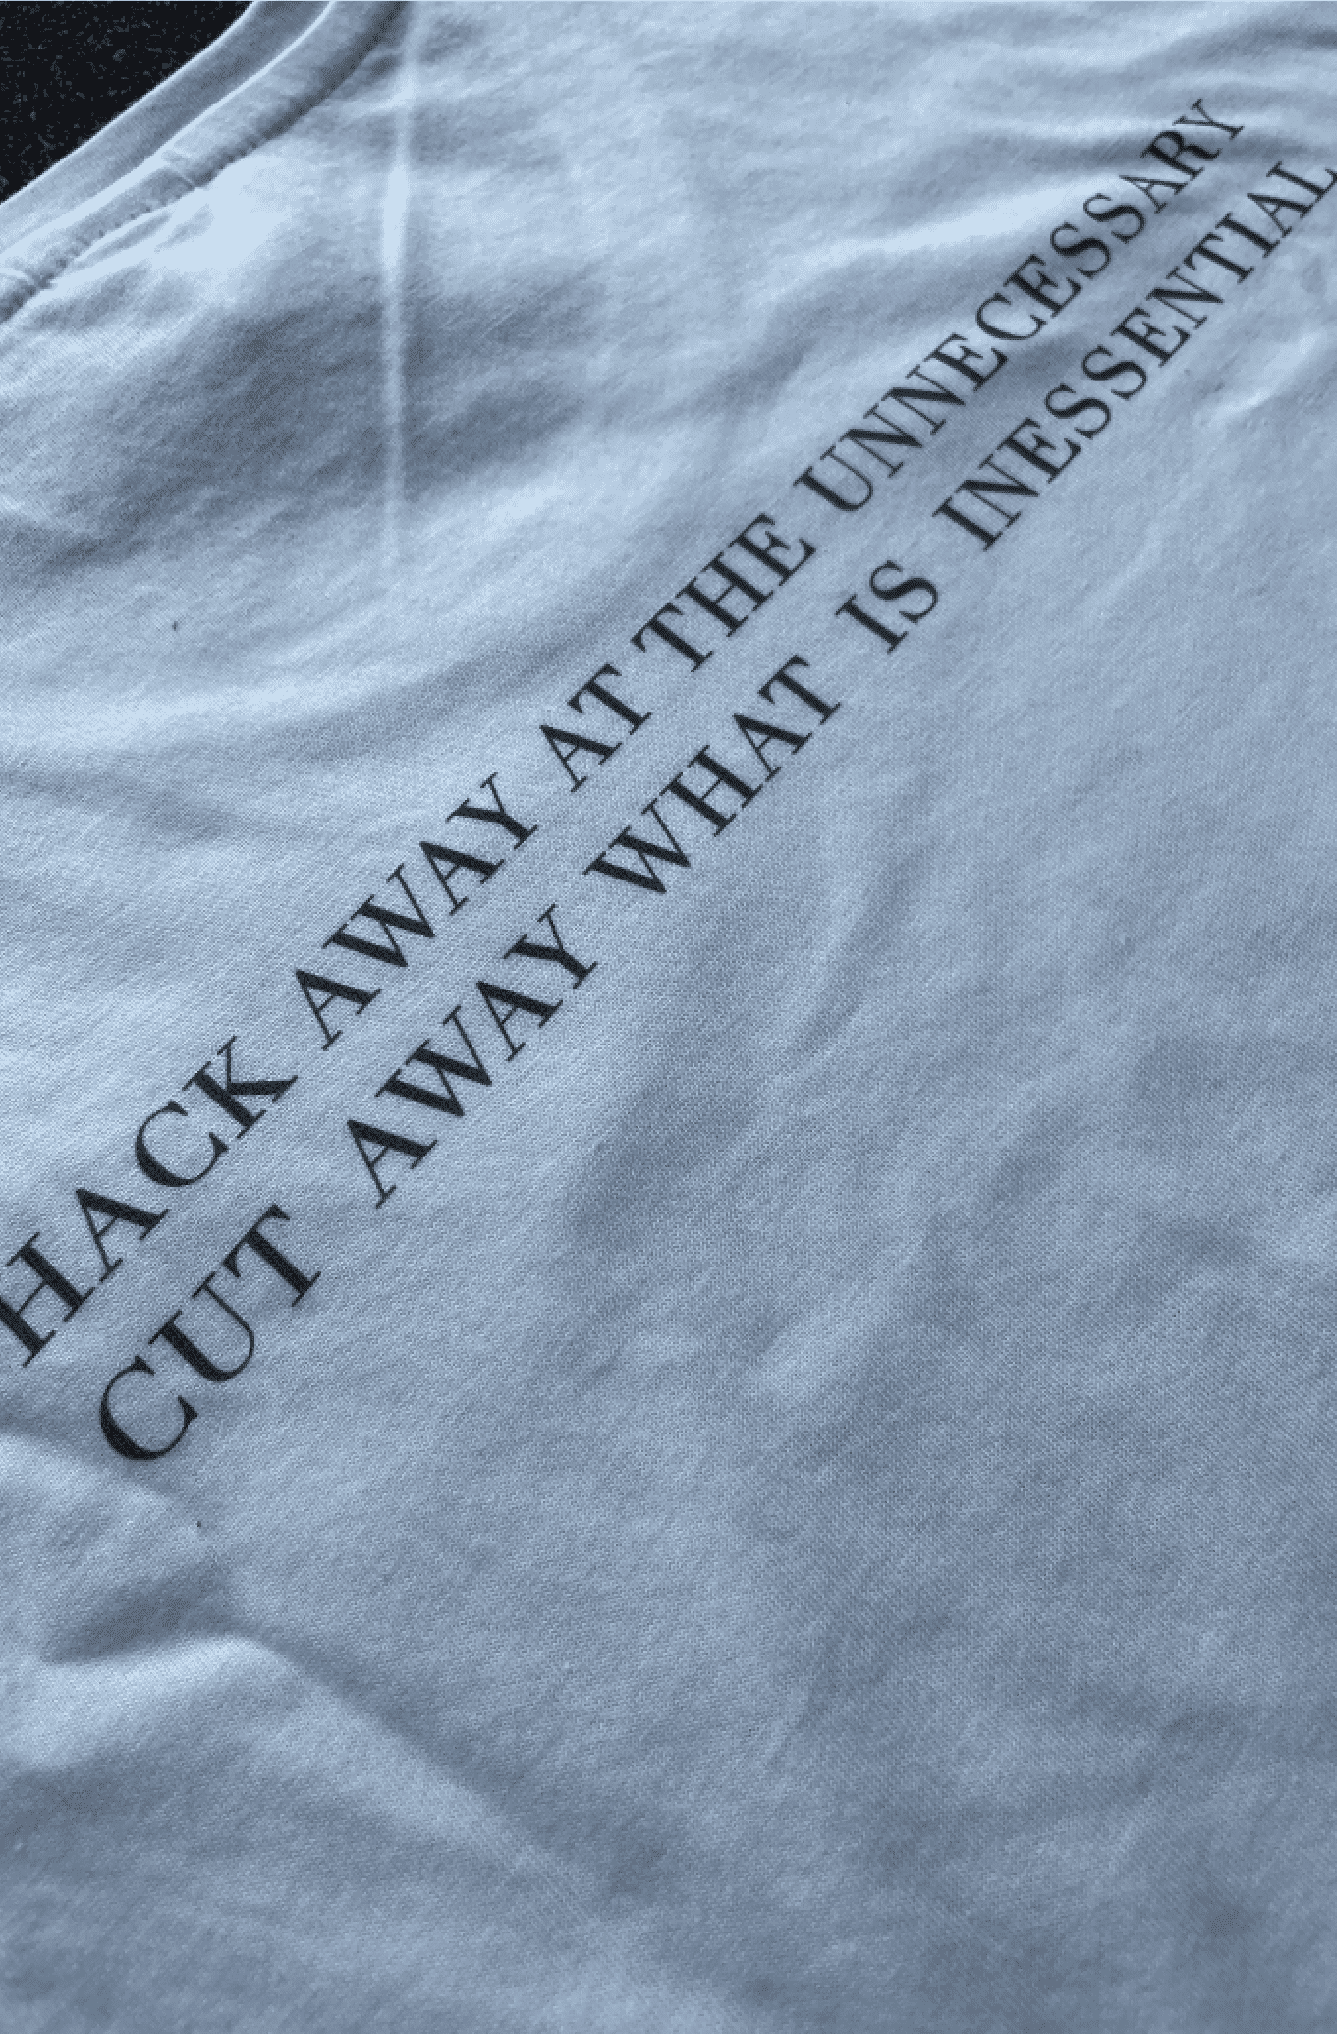 Close up of digital text printed on a white t-shirt